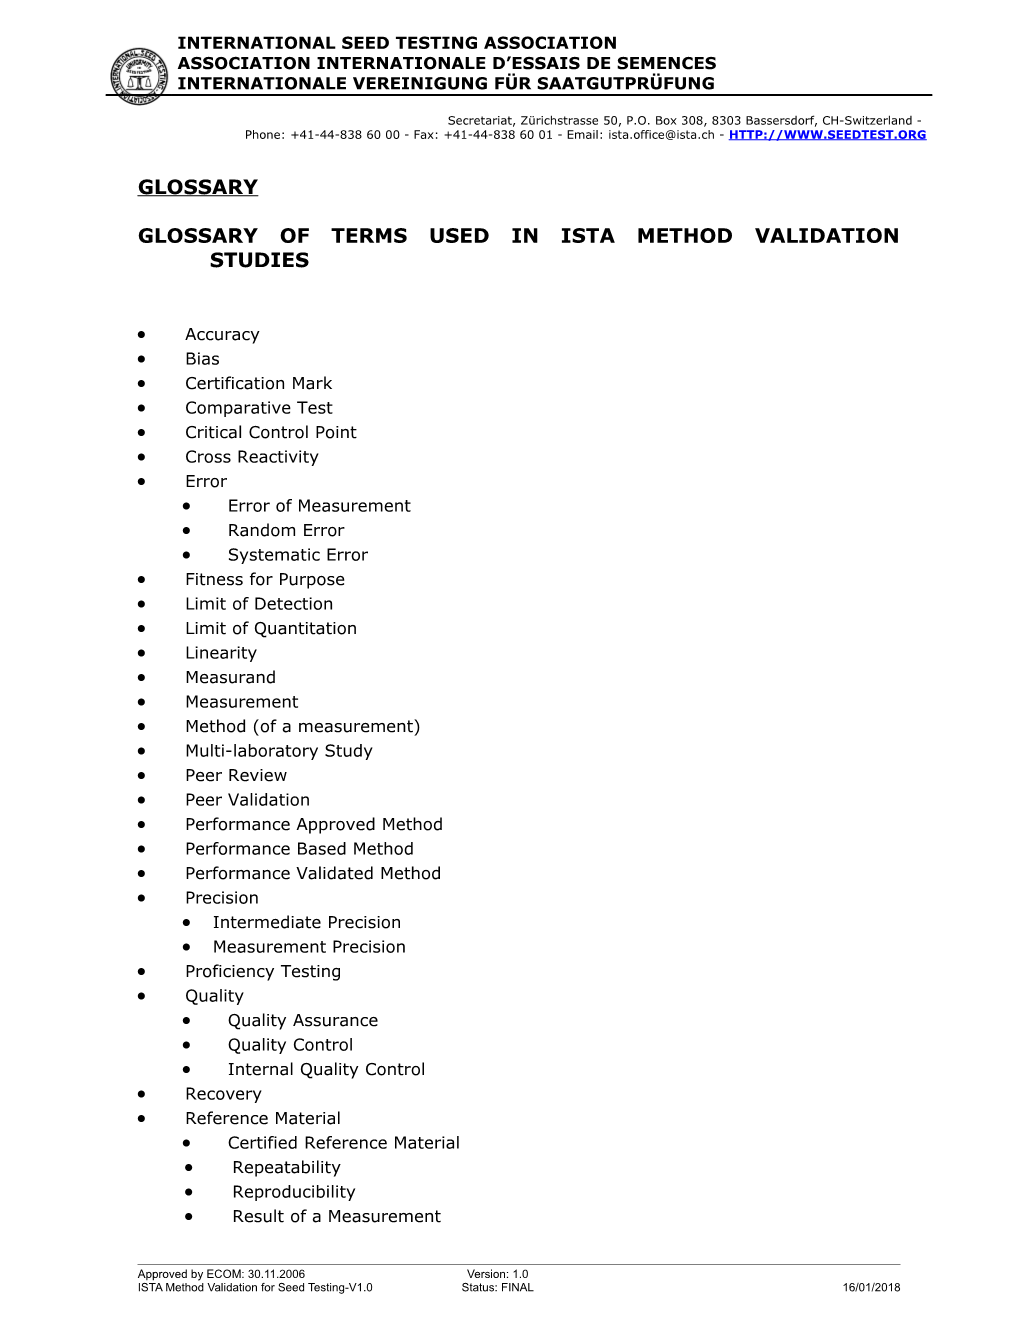 Glossary of Terms Used in Ista Method Validation Studies